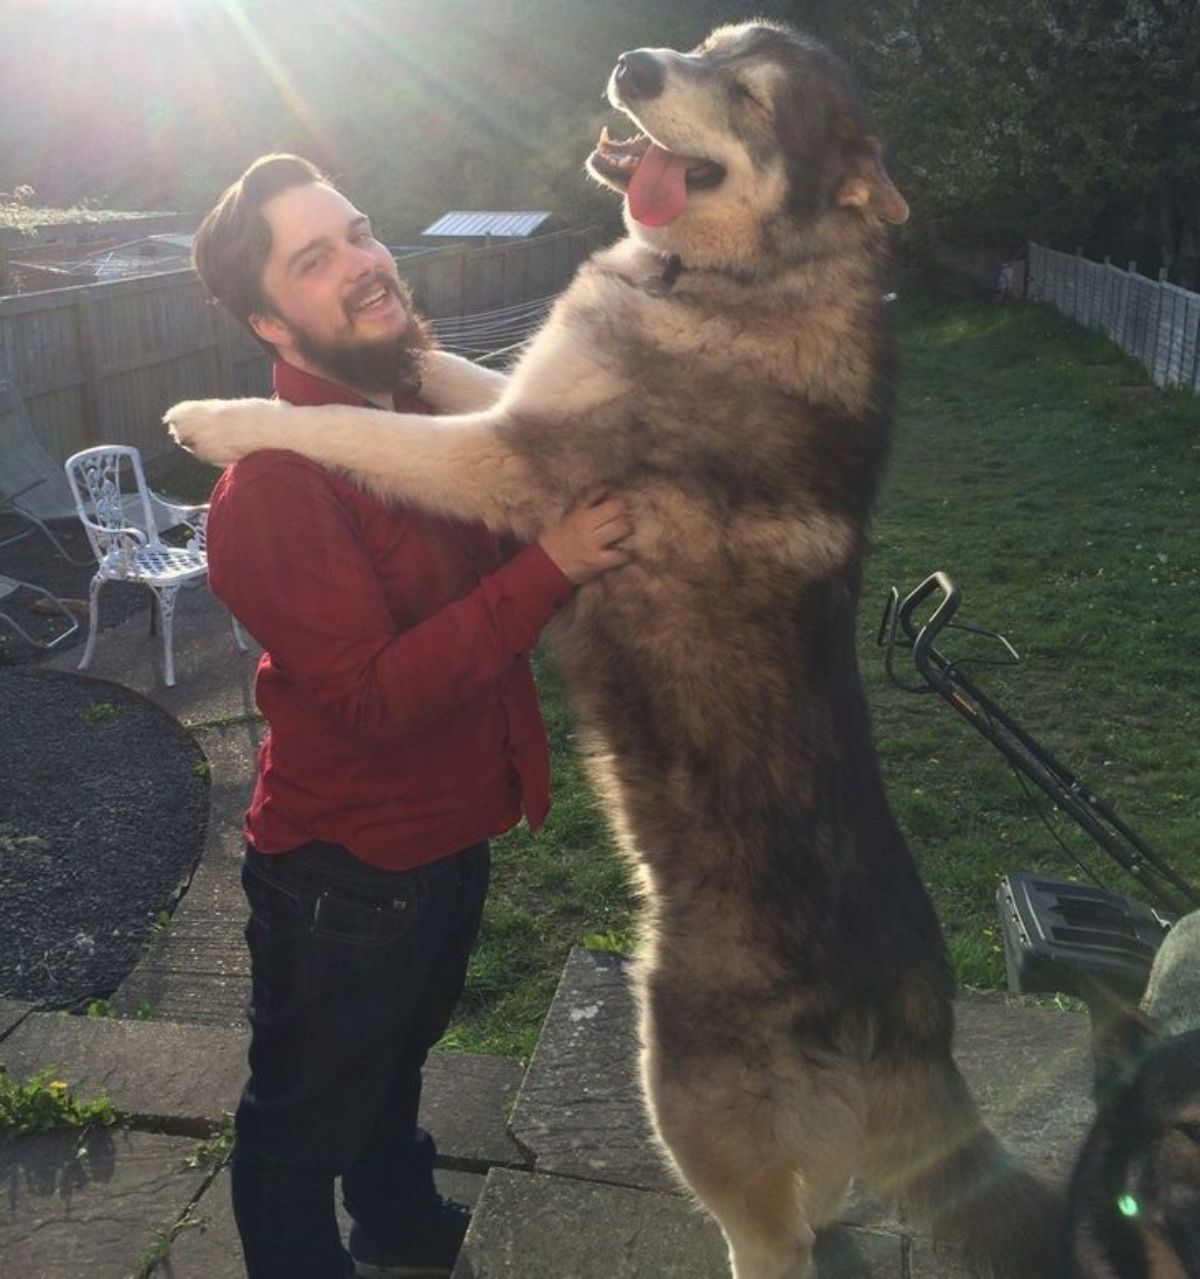 black and white alaskan malamute standing on hind legs with the front paws on a man's shoulders